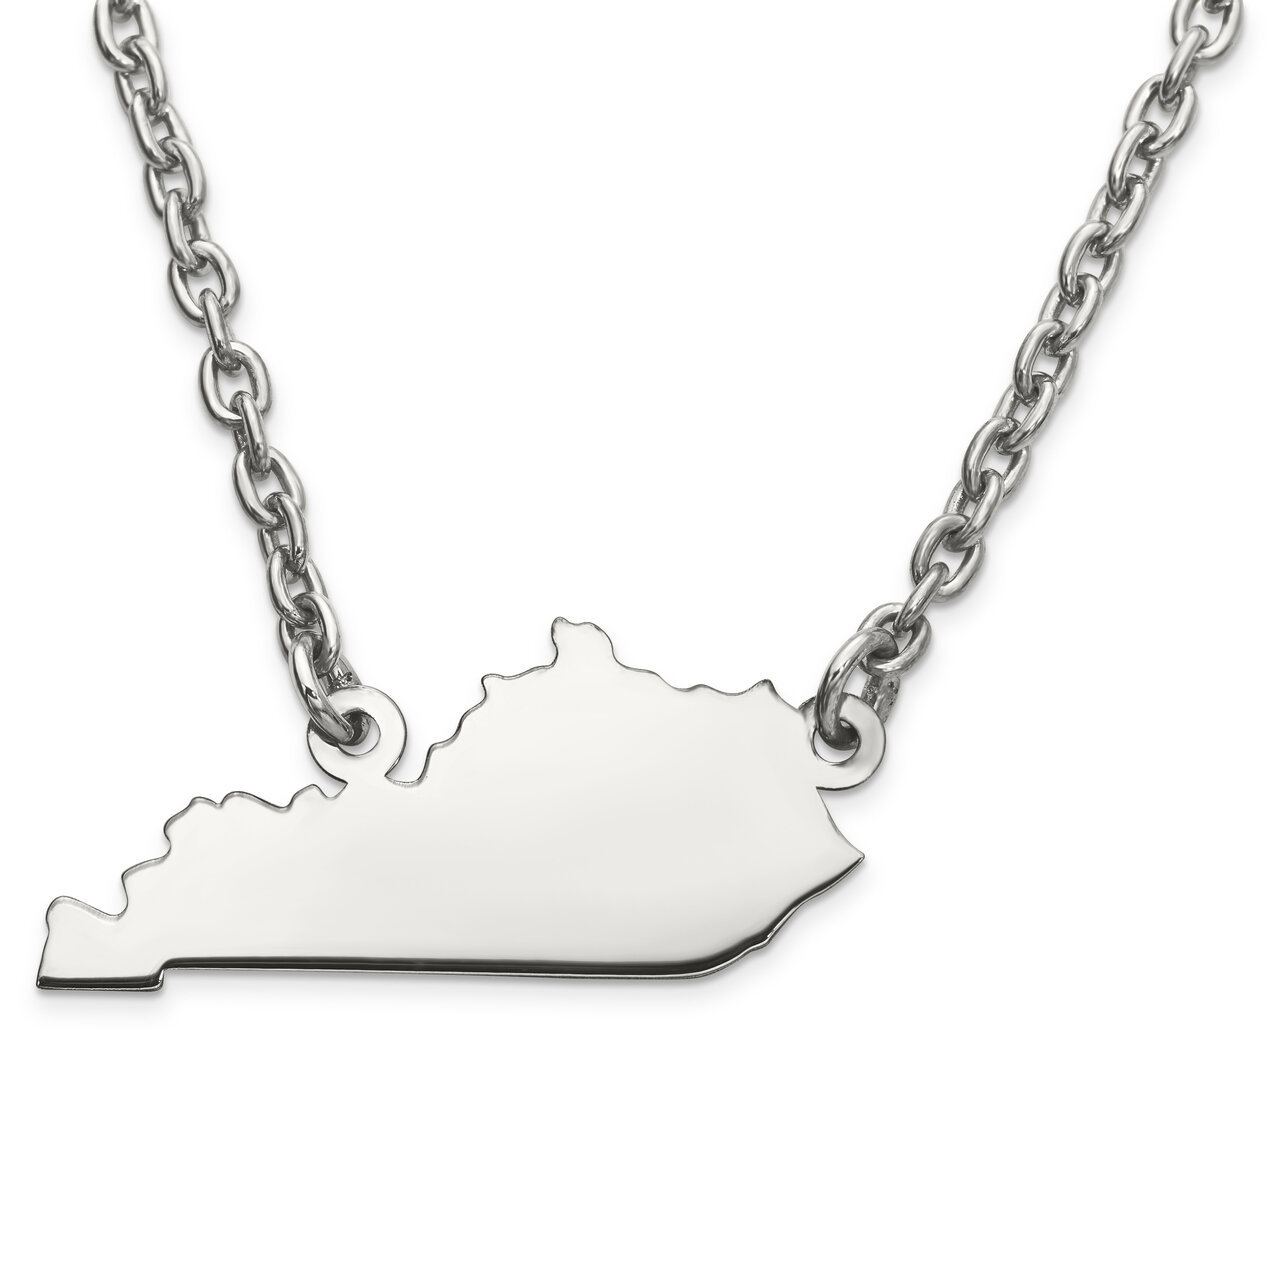 Kentucky State Pendant Necklace with Chain 14k White Gold Engravable XNA706W-KY